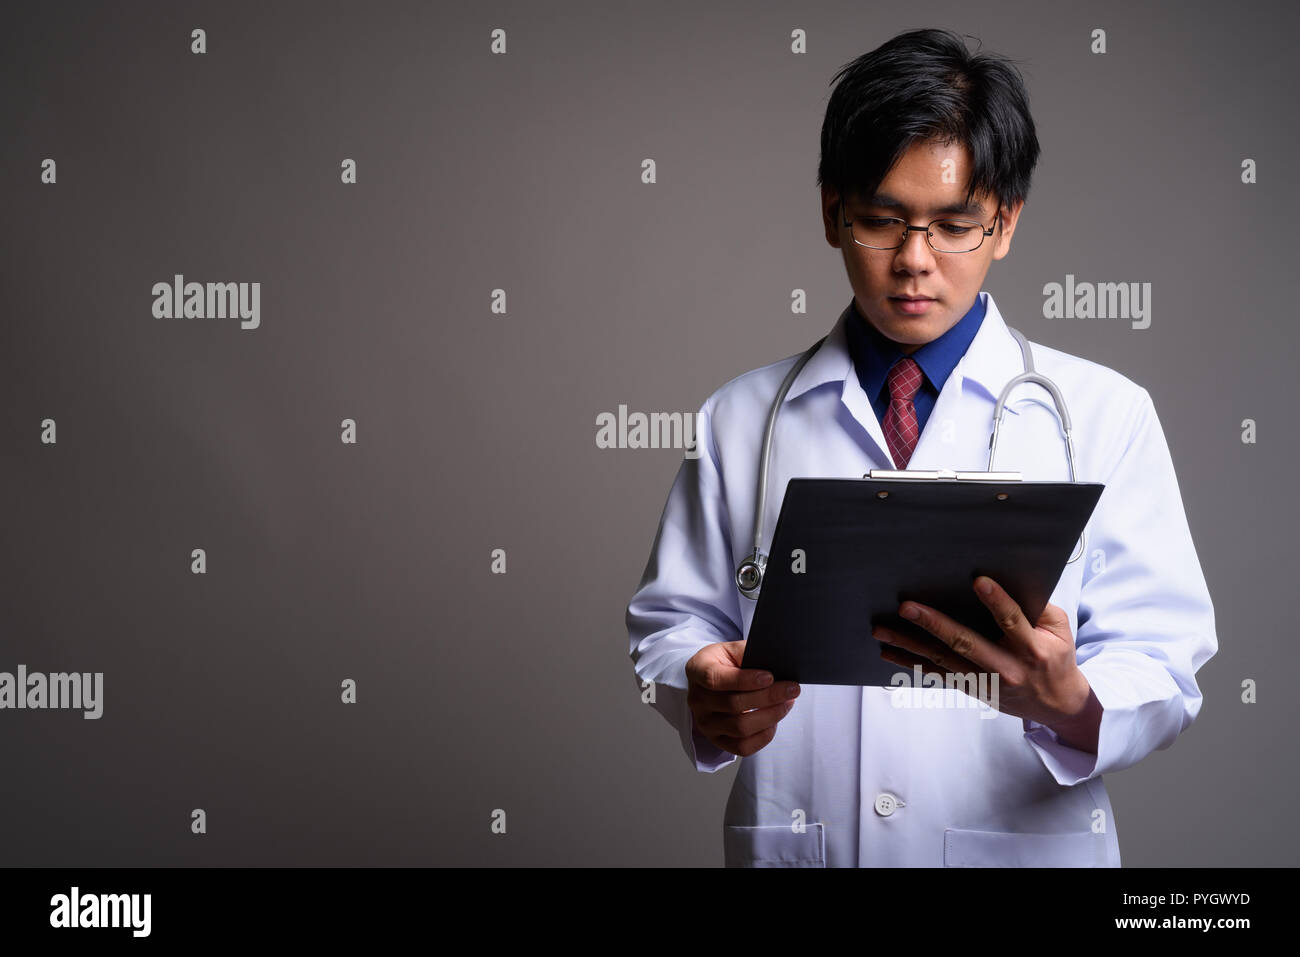 Portrait of young Asian man doctor reading checklist from clipboard Stock Photo